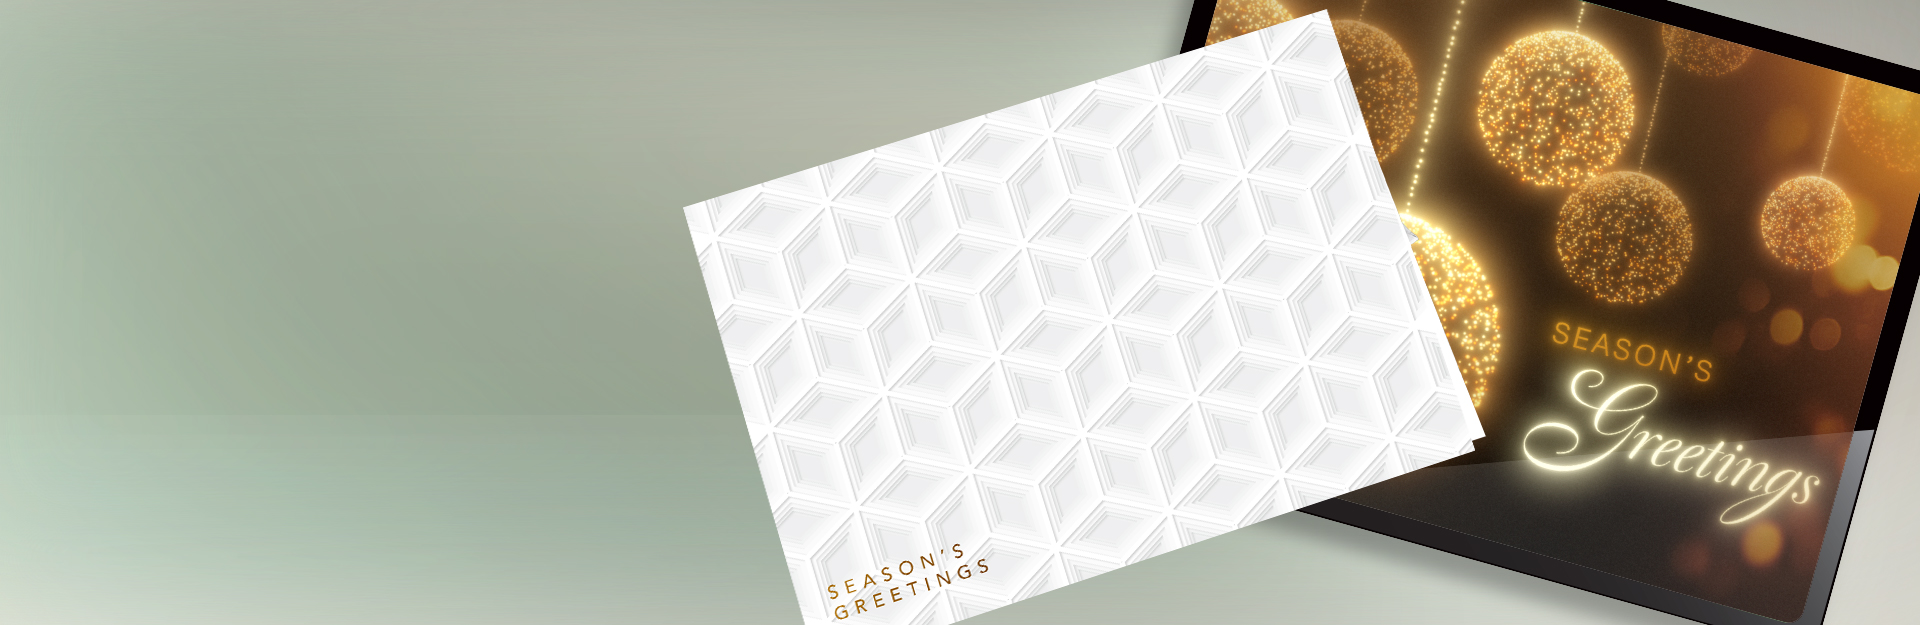 Textured card and ecard design presented with text "create dynamic graphics" for seasons greetings cards for businesses